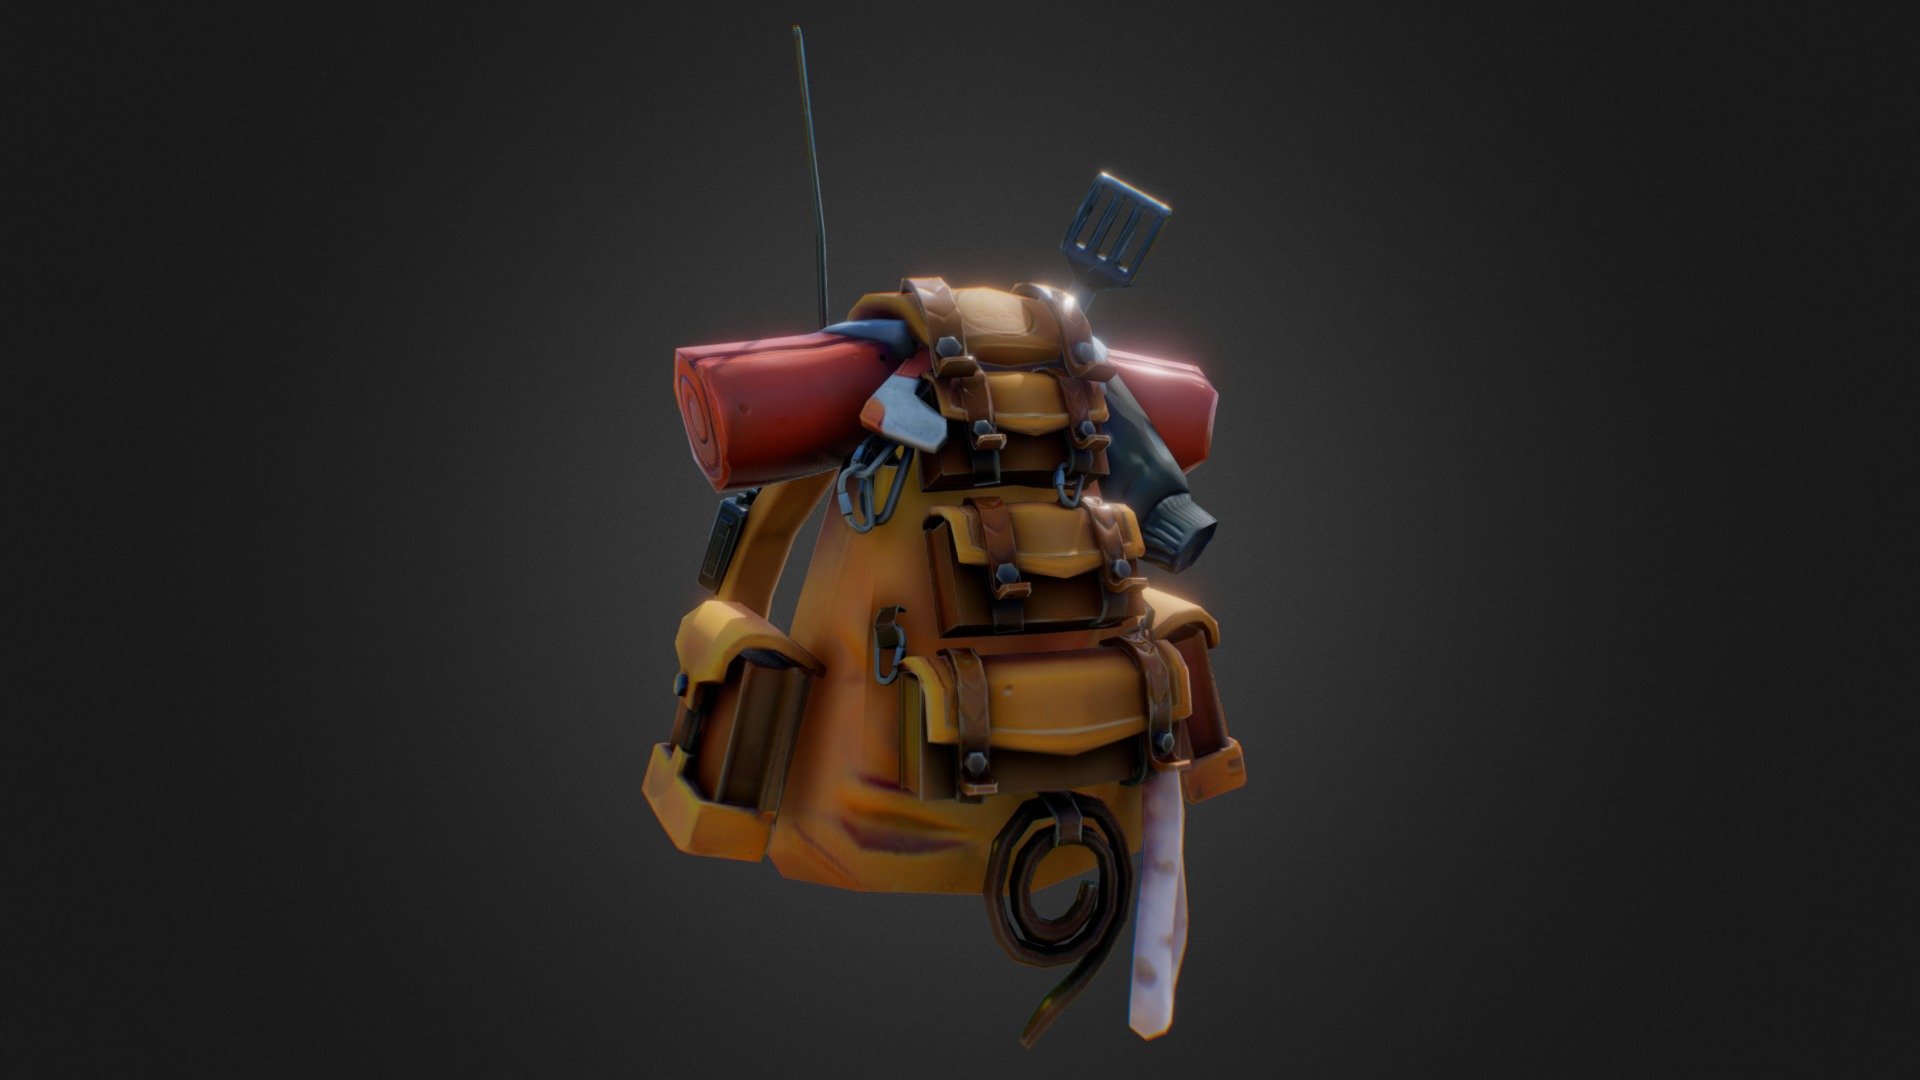 Piece from my project : &ldquo;Wild Camp&ldquo;

Check it out here 3d model